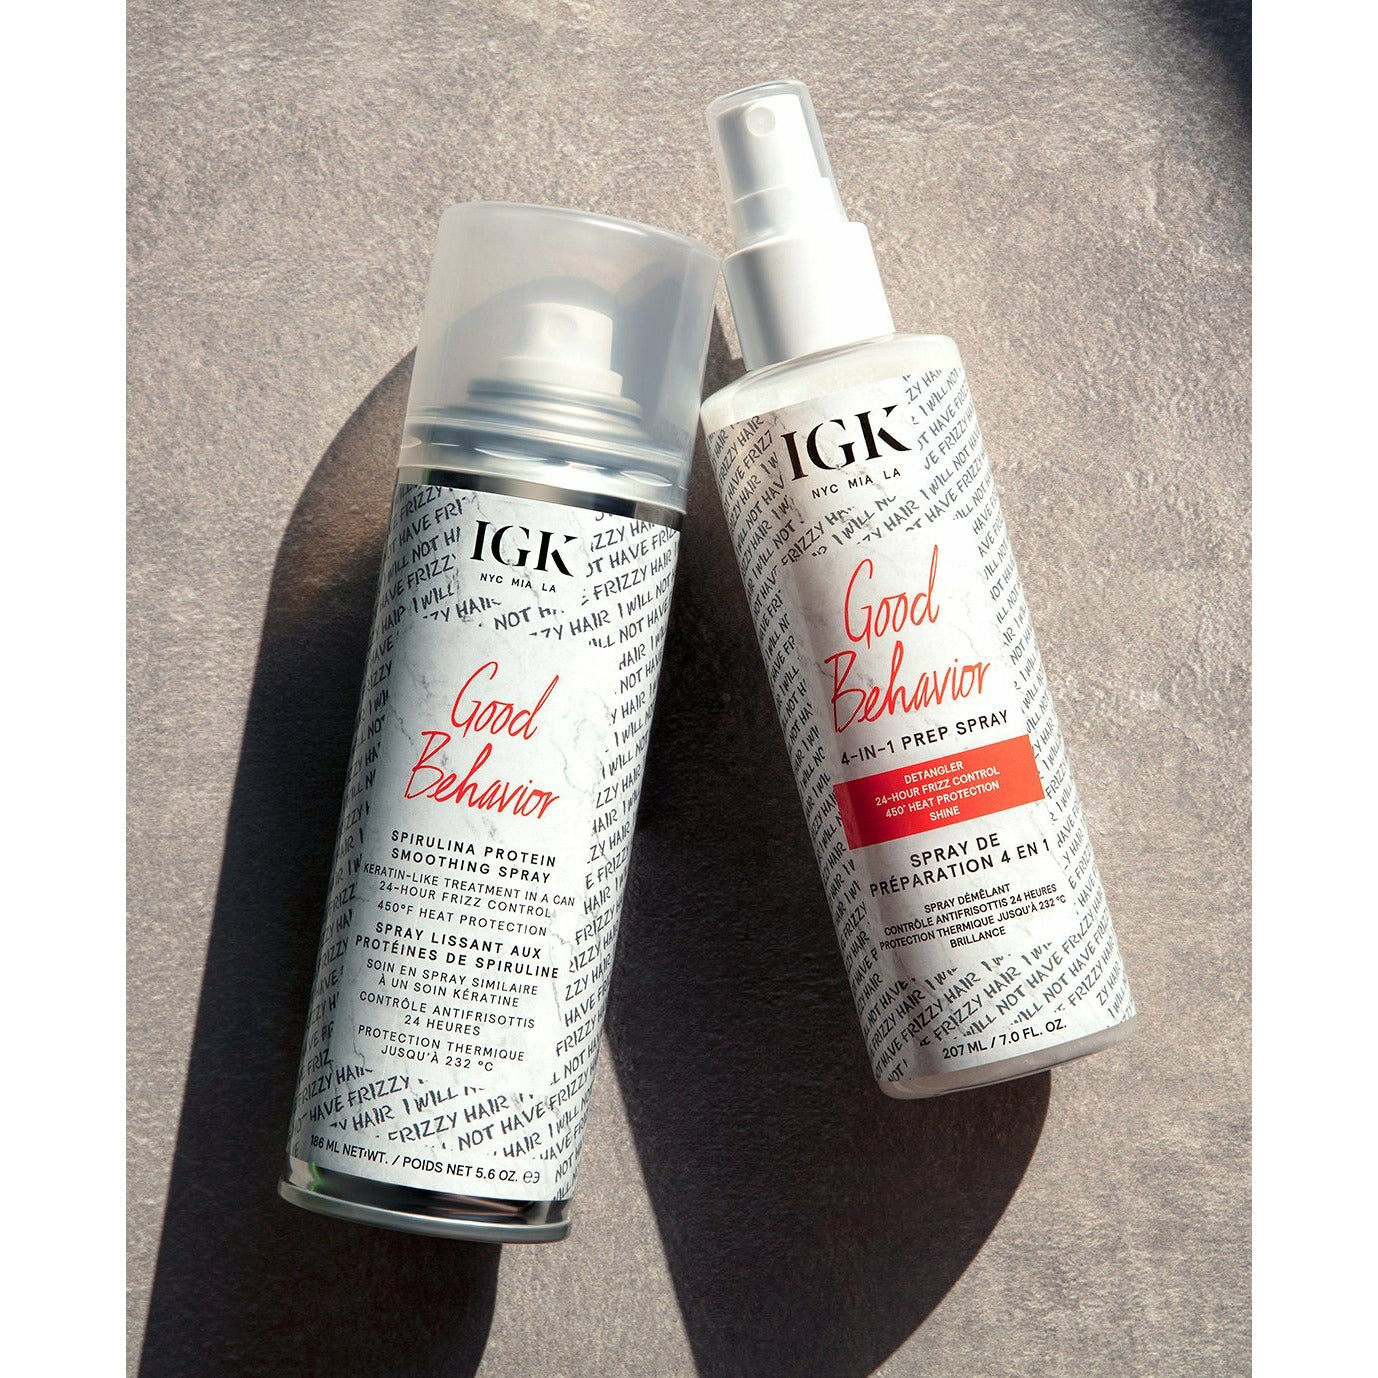 IGK Good Behavior 4-In-1 Prep Spray - {{ Canadian Clothing and Beauty Boutique}}